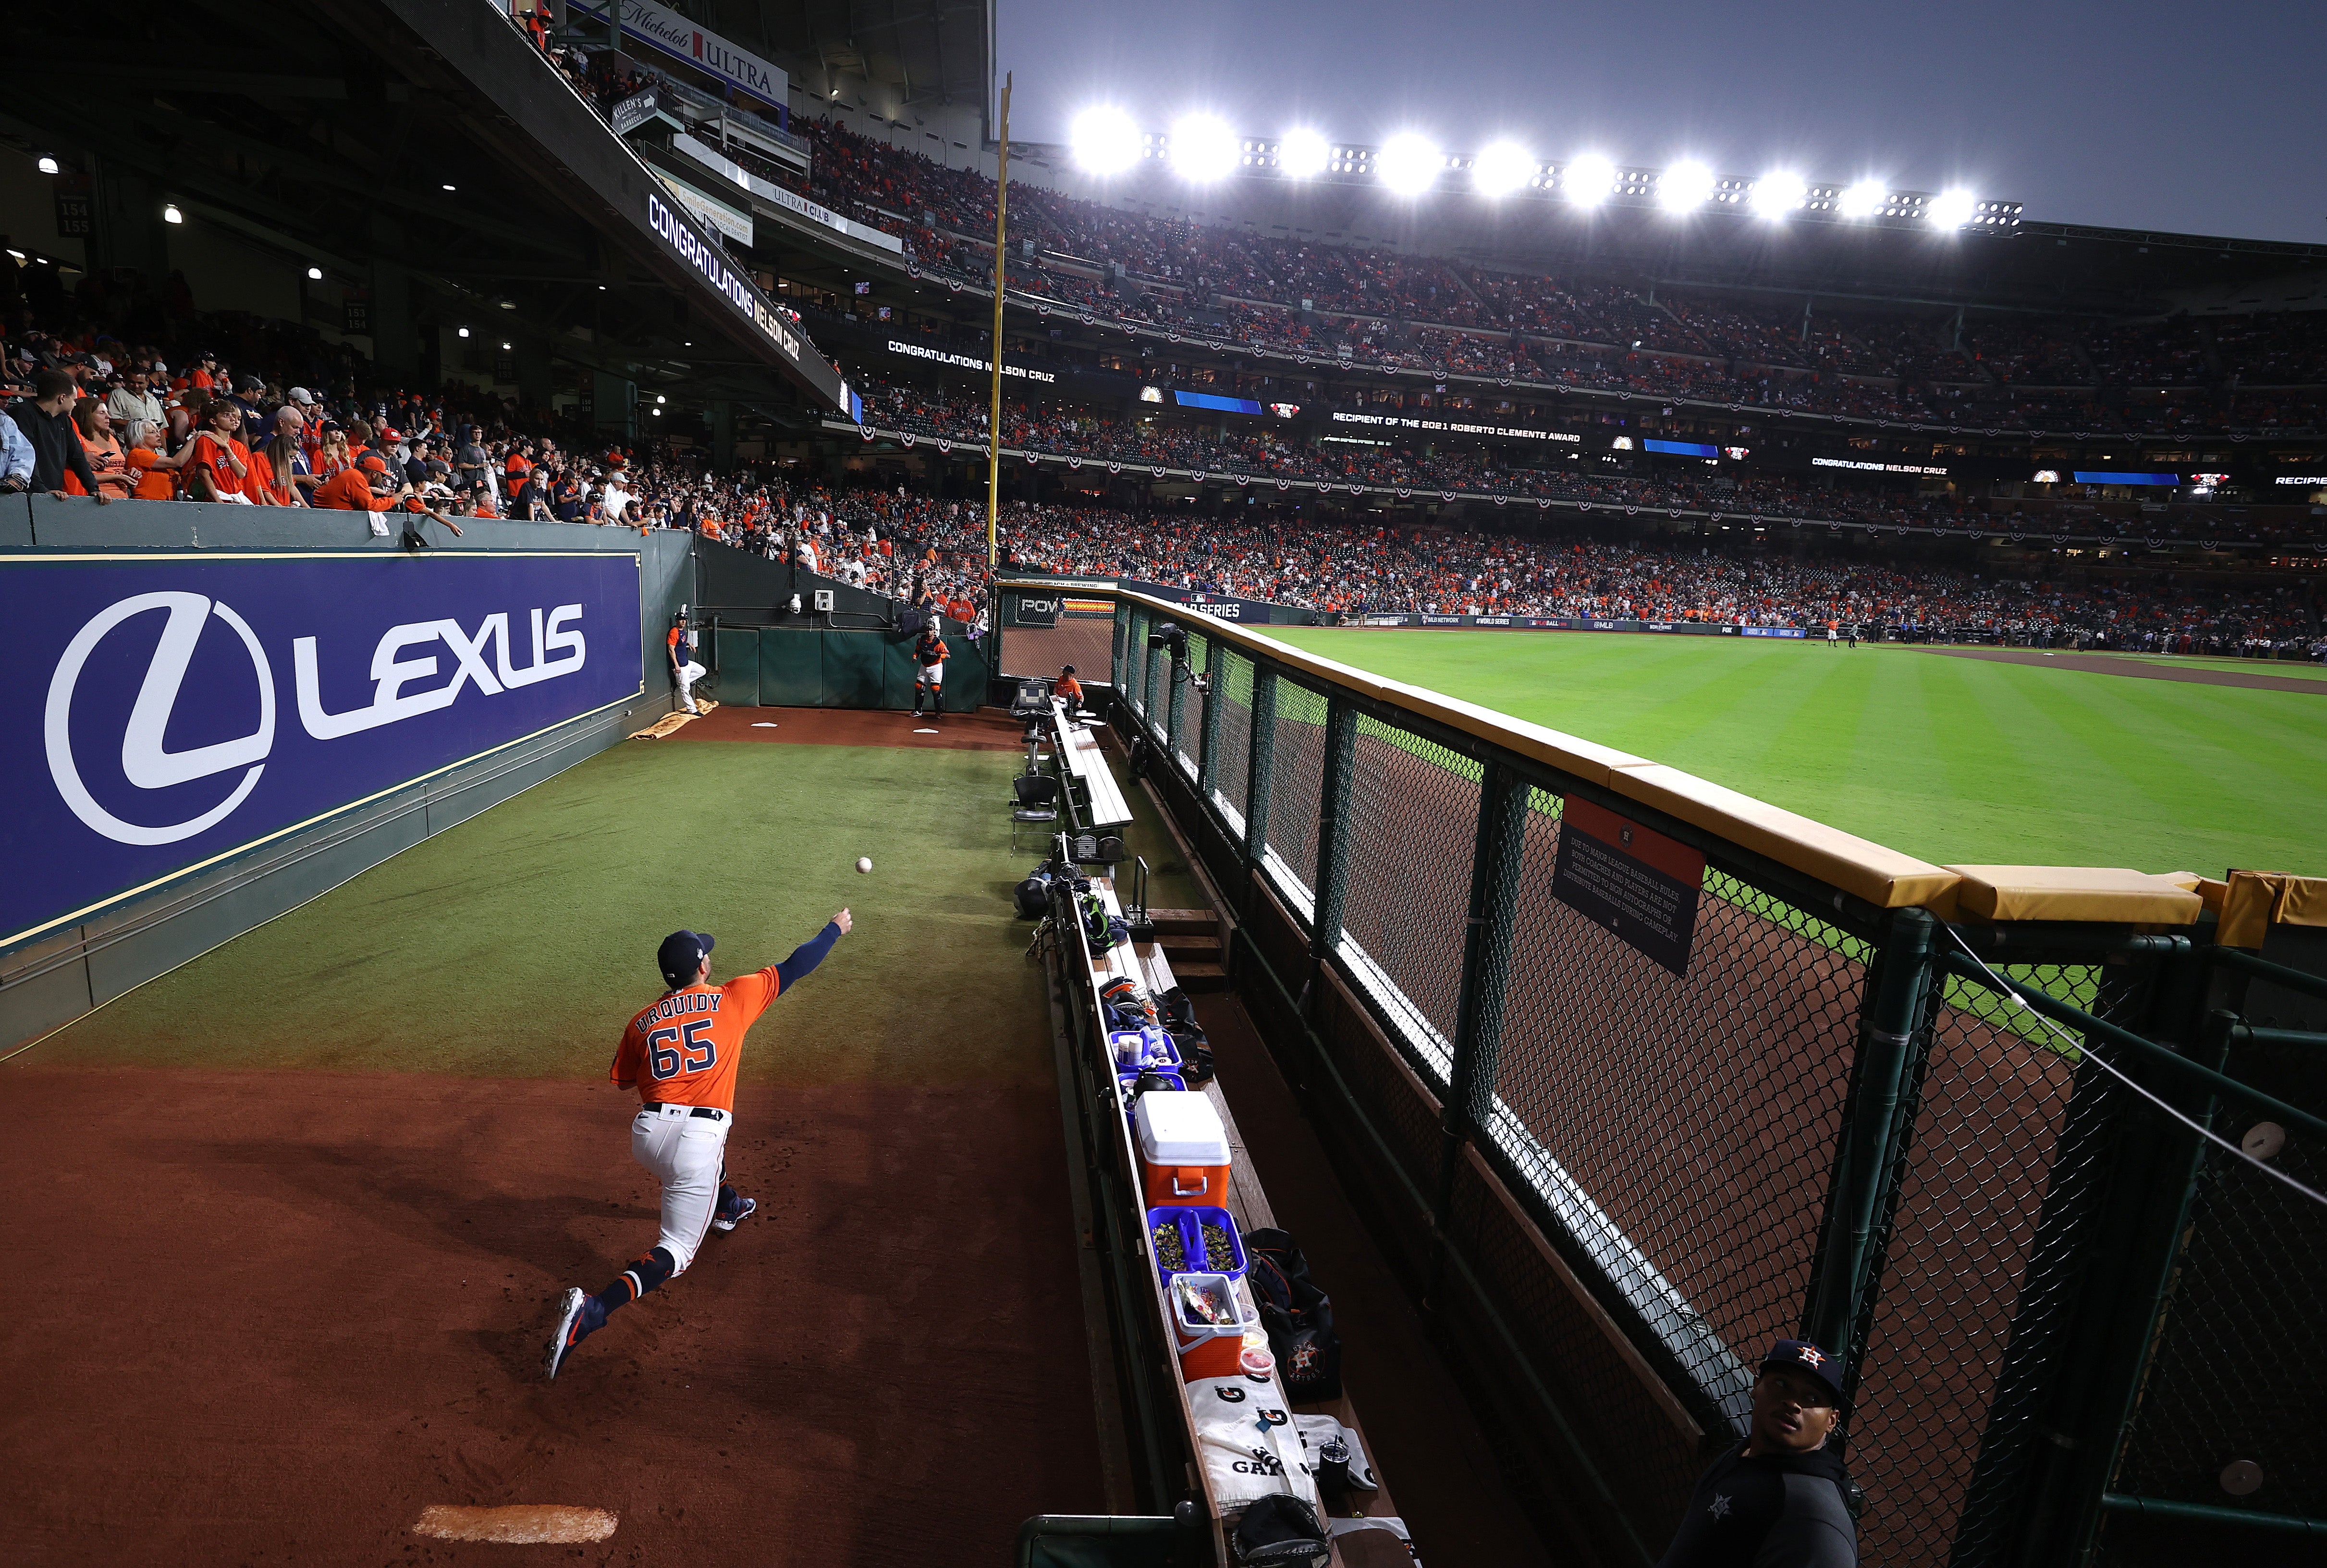 A Houston Astros pitcher warms up in the ‘bullpen’ during the World Series